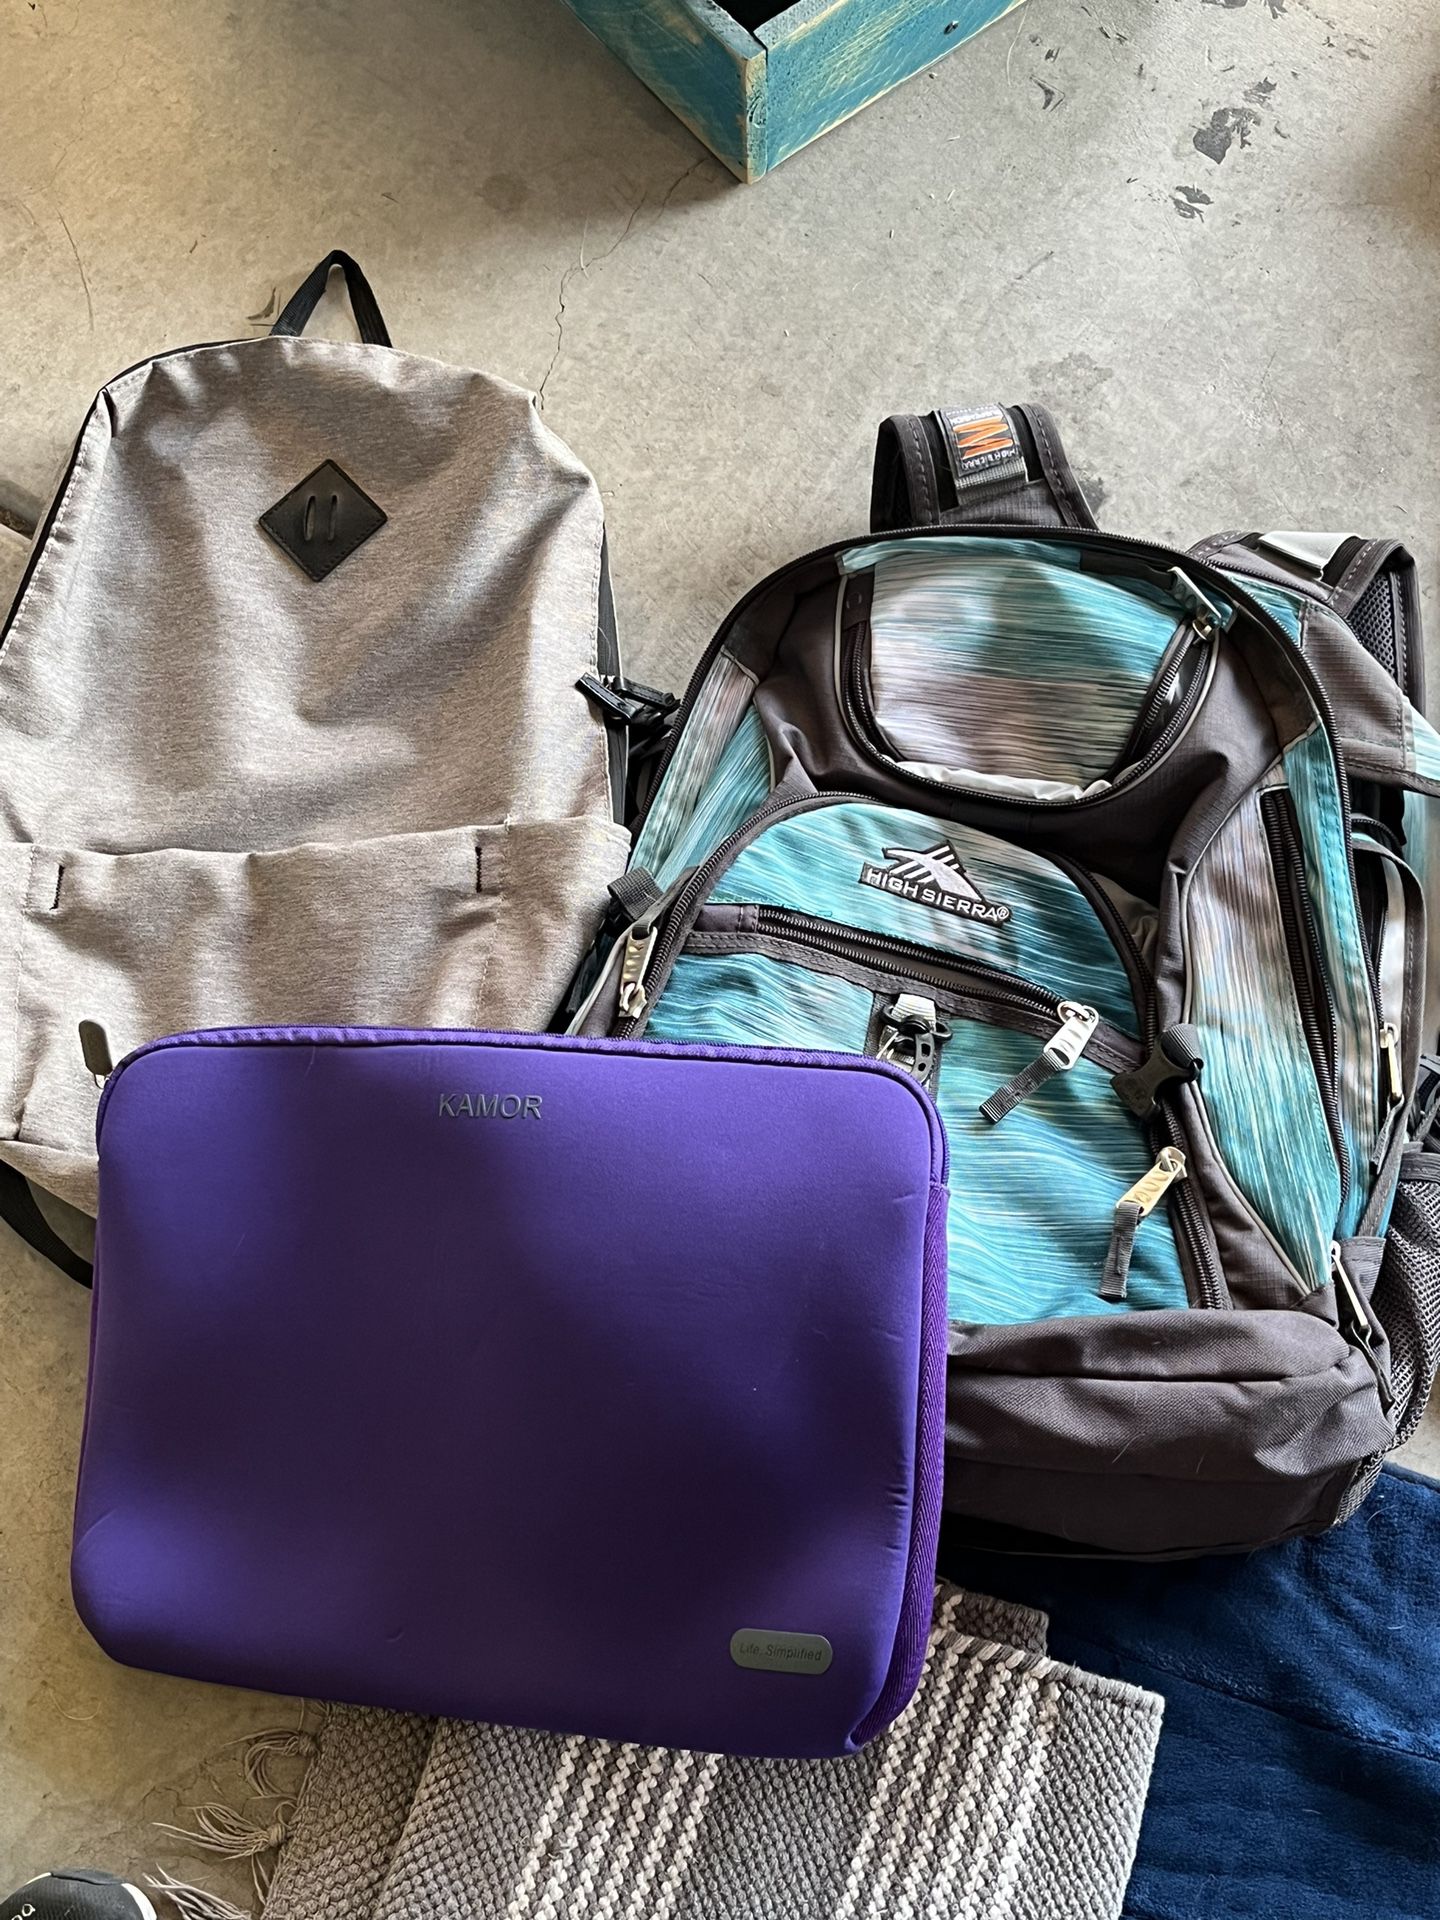 Backpacks and Laptop Bag 